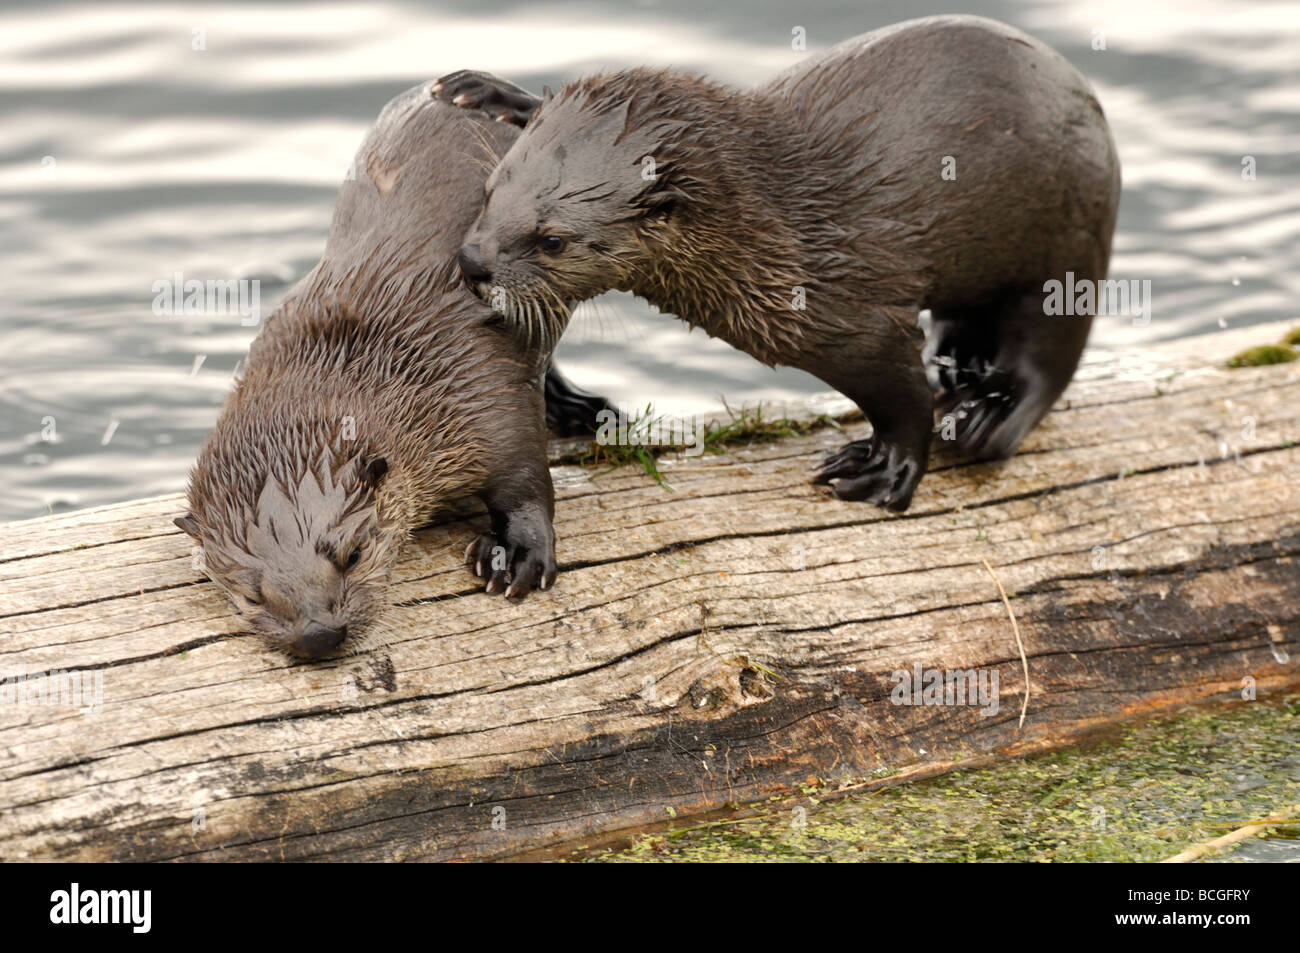 Stock photo of two river otter pups playing on a log at a lake, Yellowstone National Park, Montana, 2009. Stock Photo